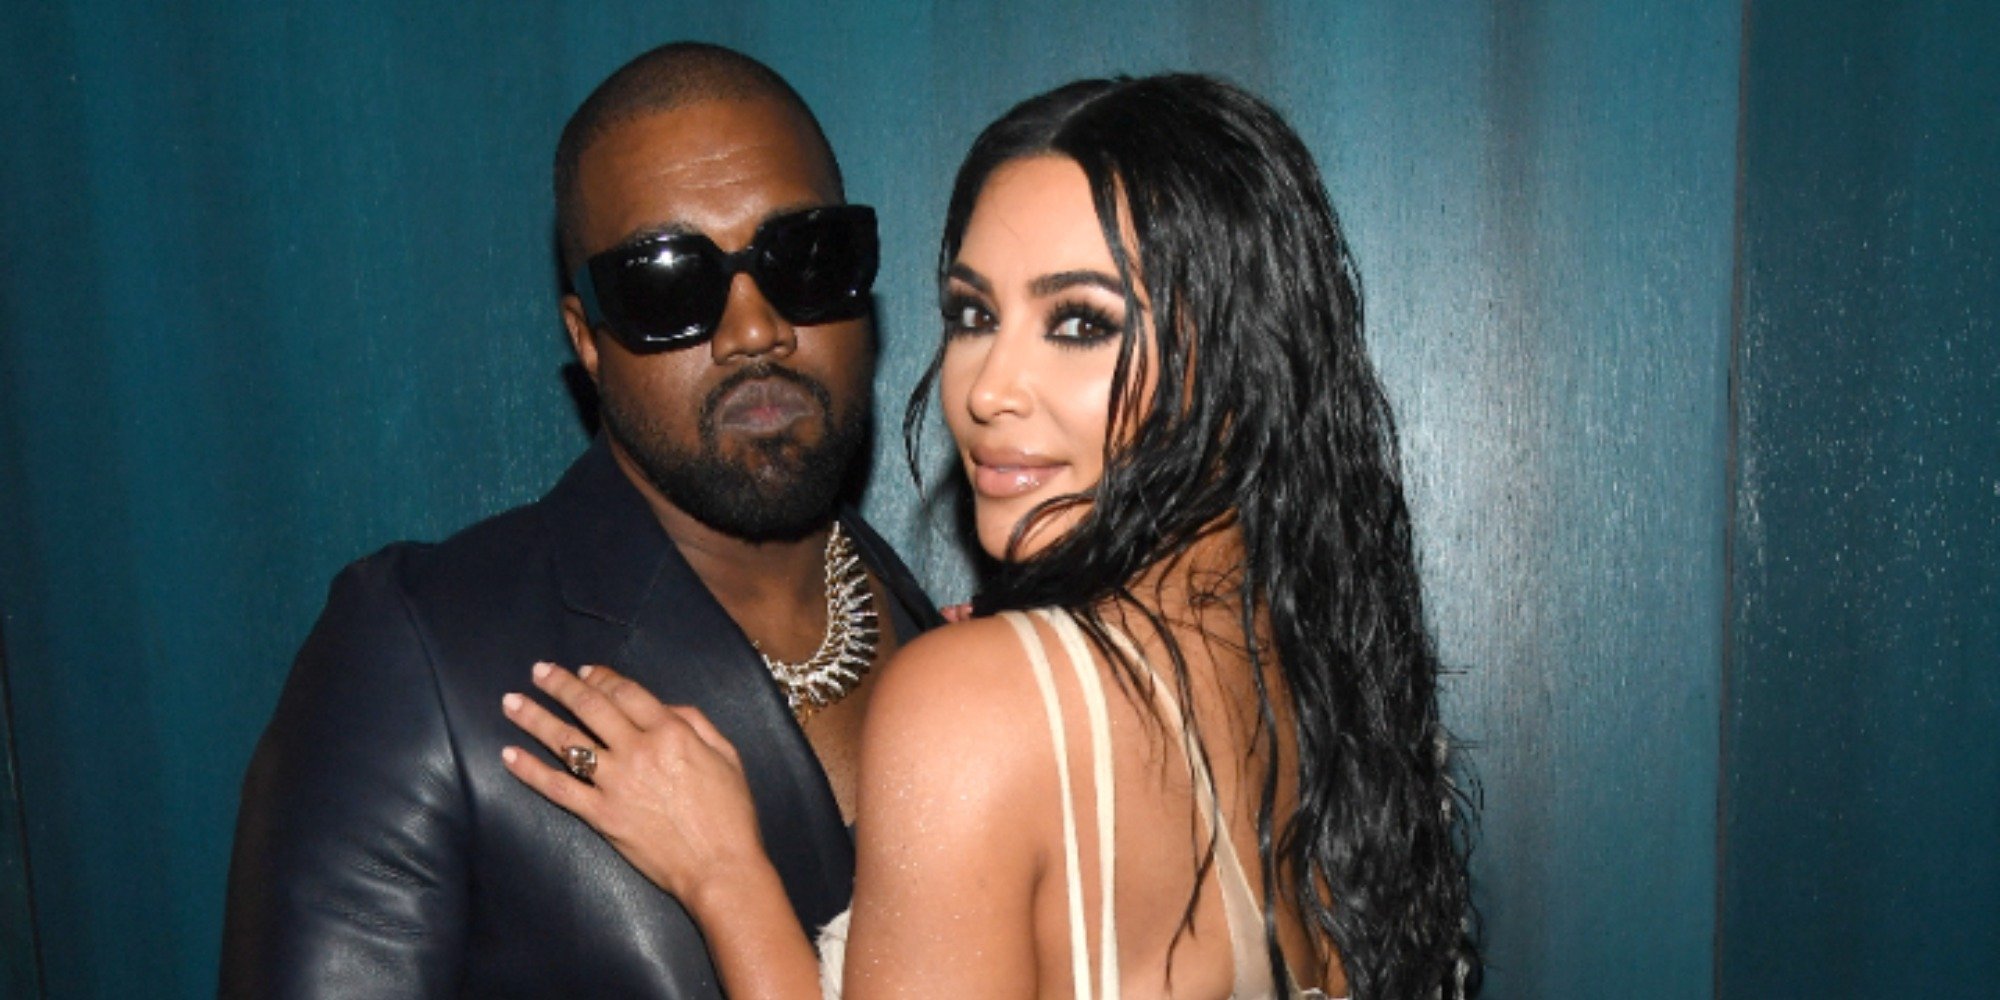 Kanye West and Kim Kardashian at the Vanity Fair Oscar party in 2020.